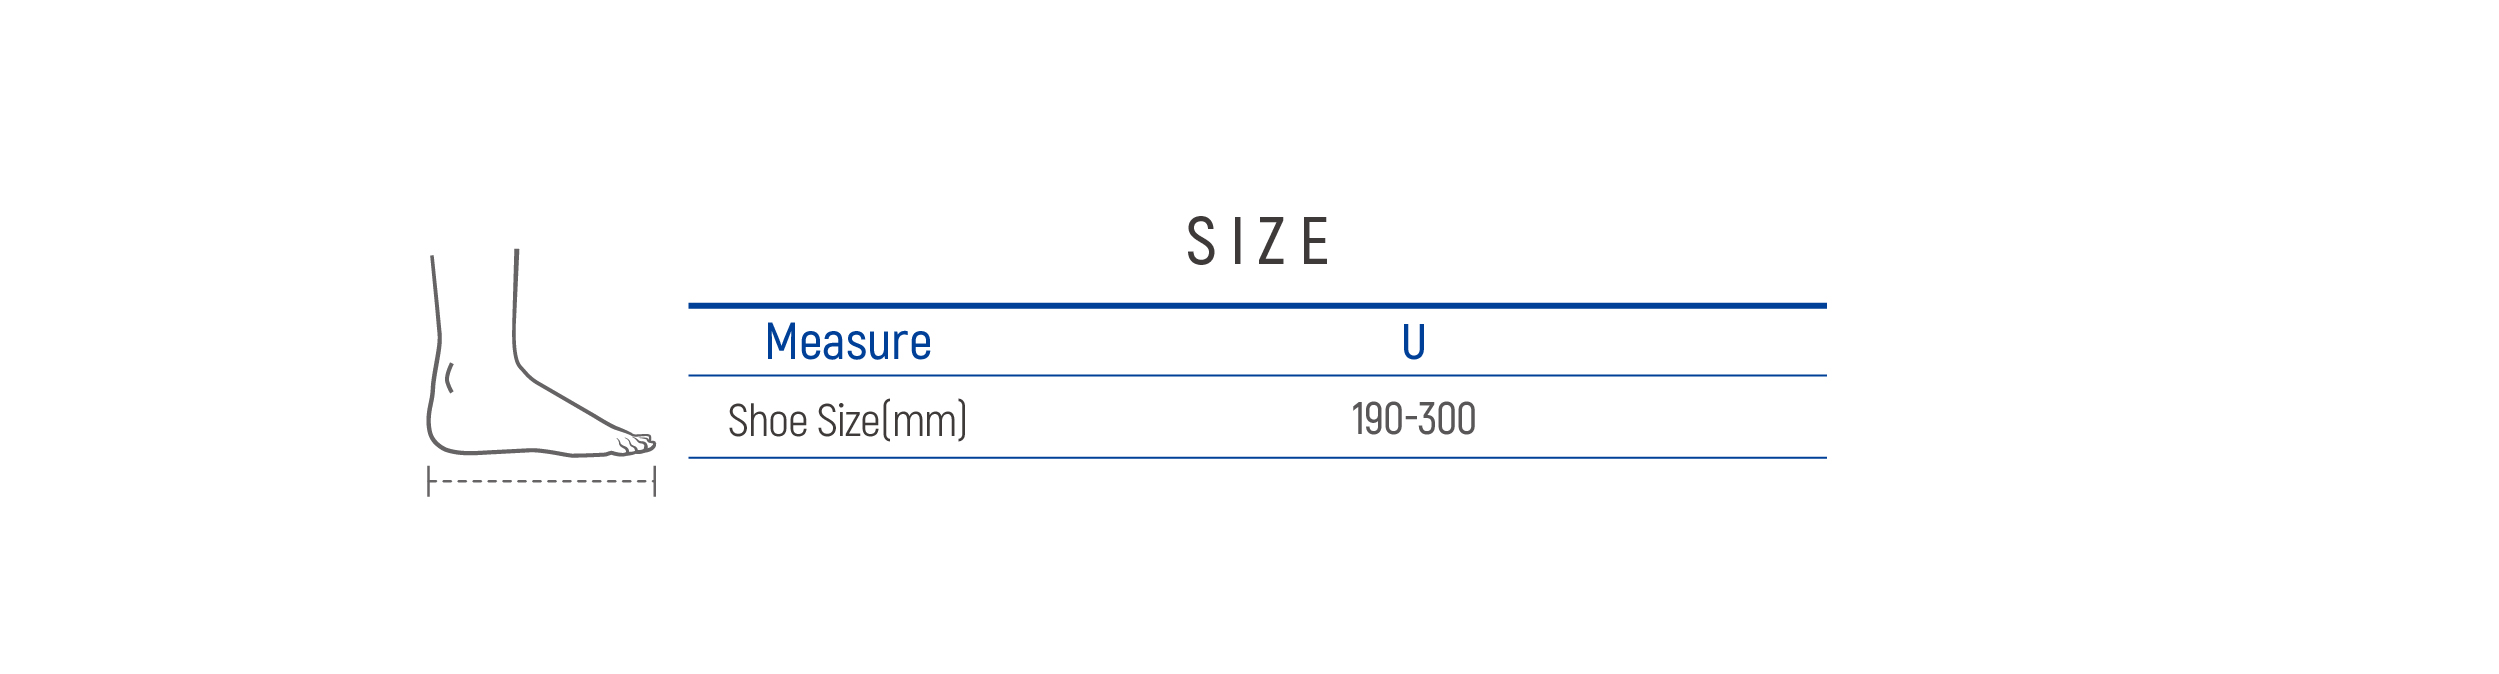 DR-903 Size table image